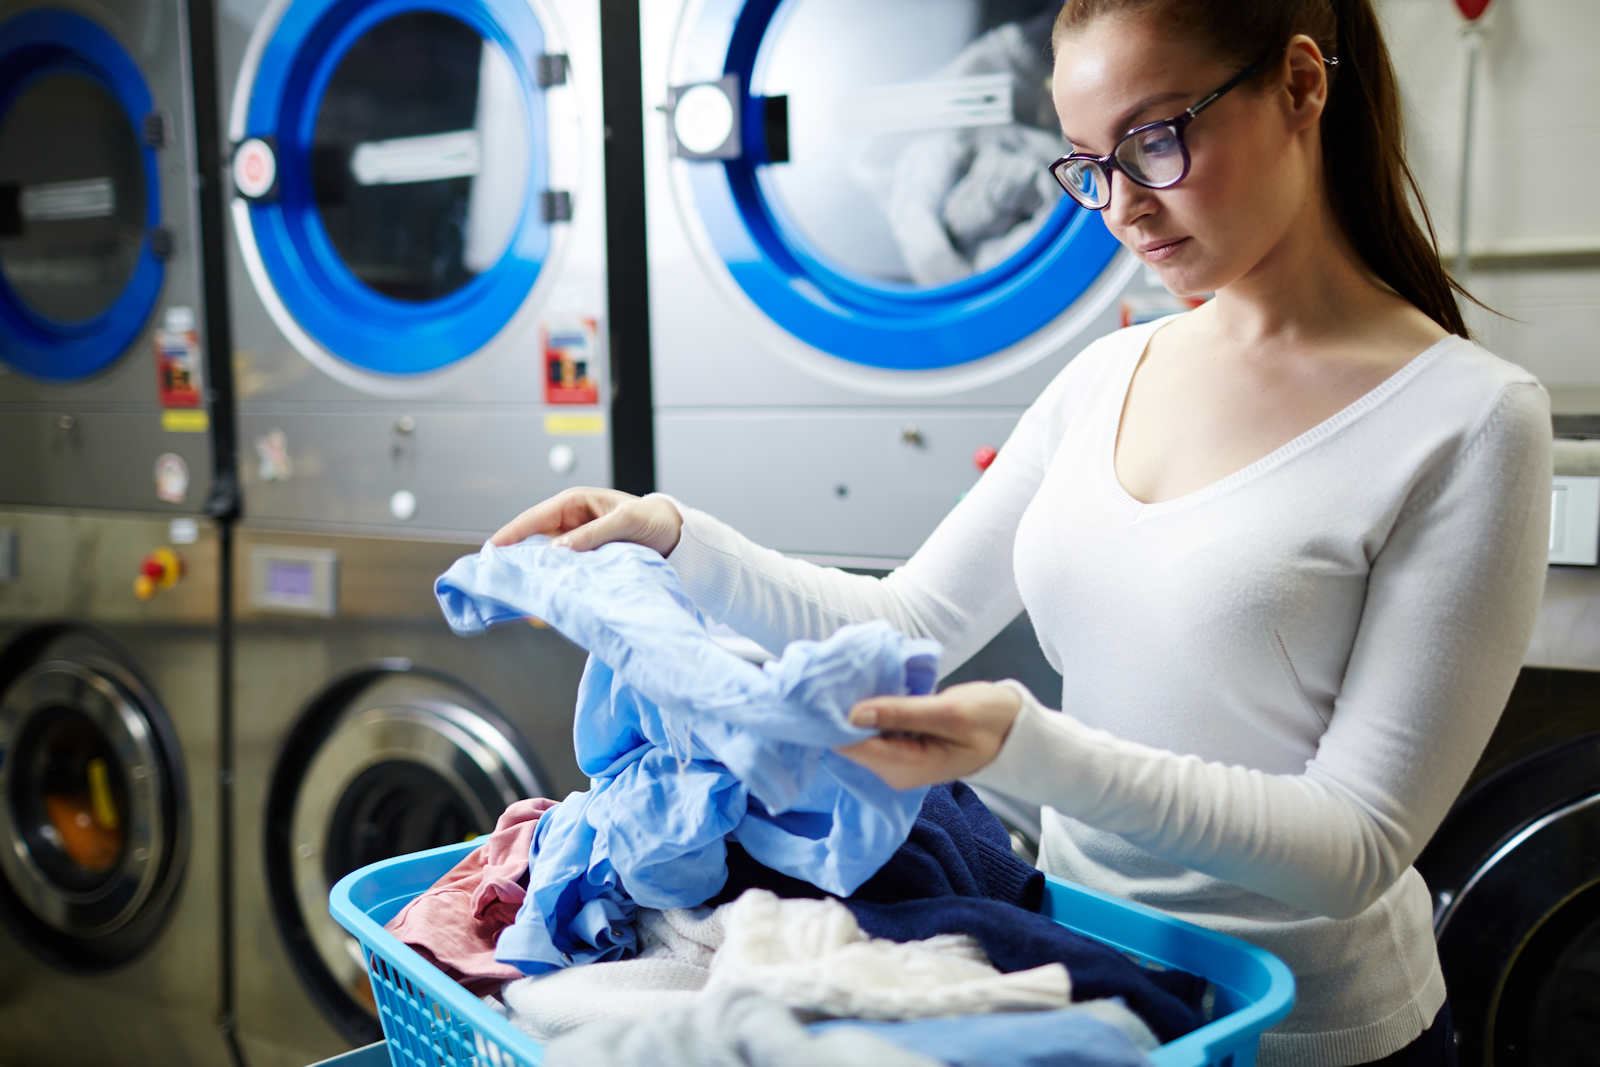 Express Laundry Center in Conroe